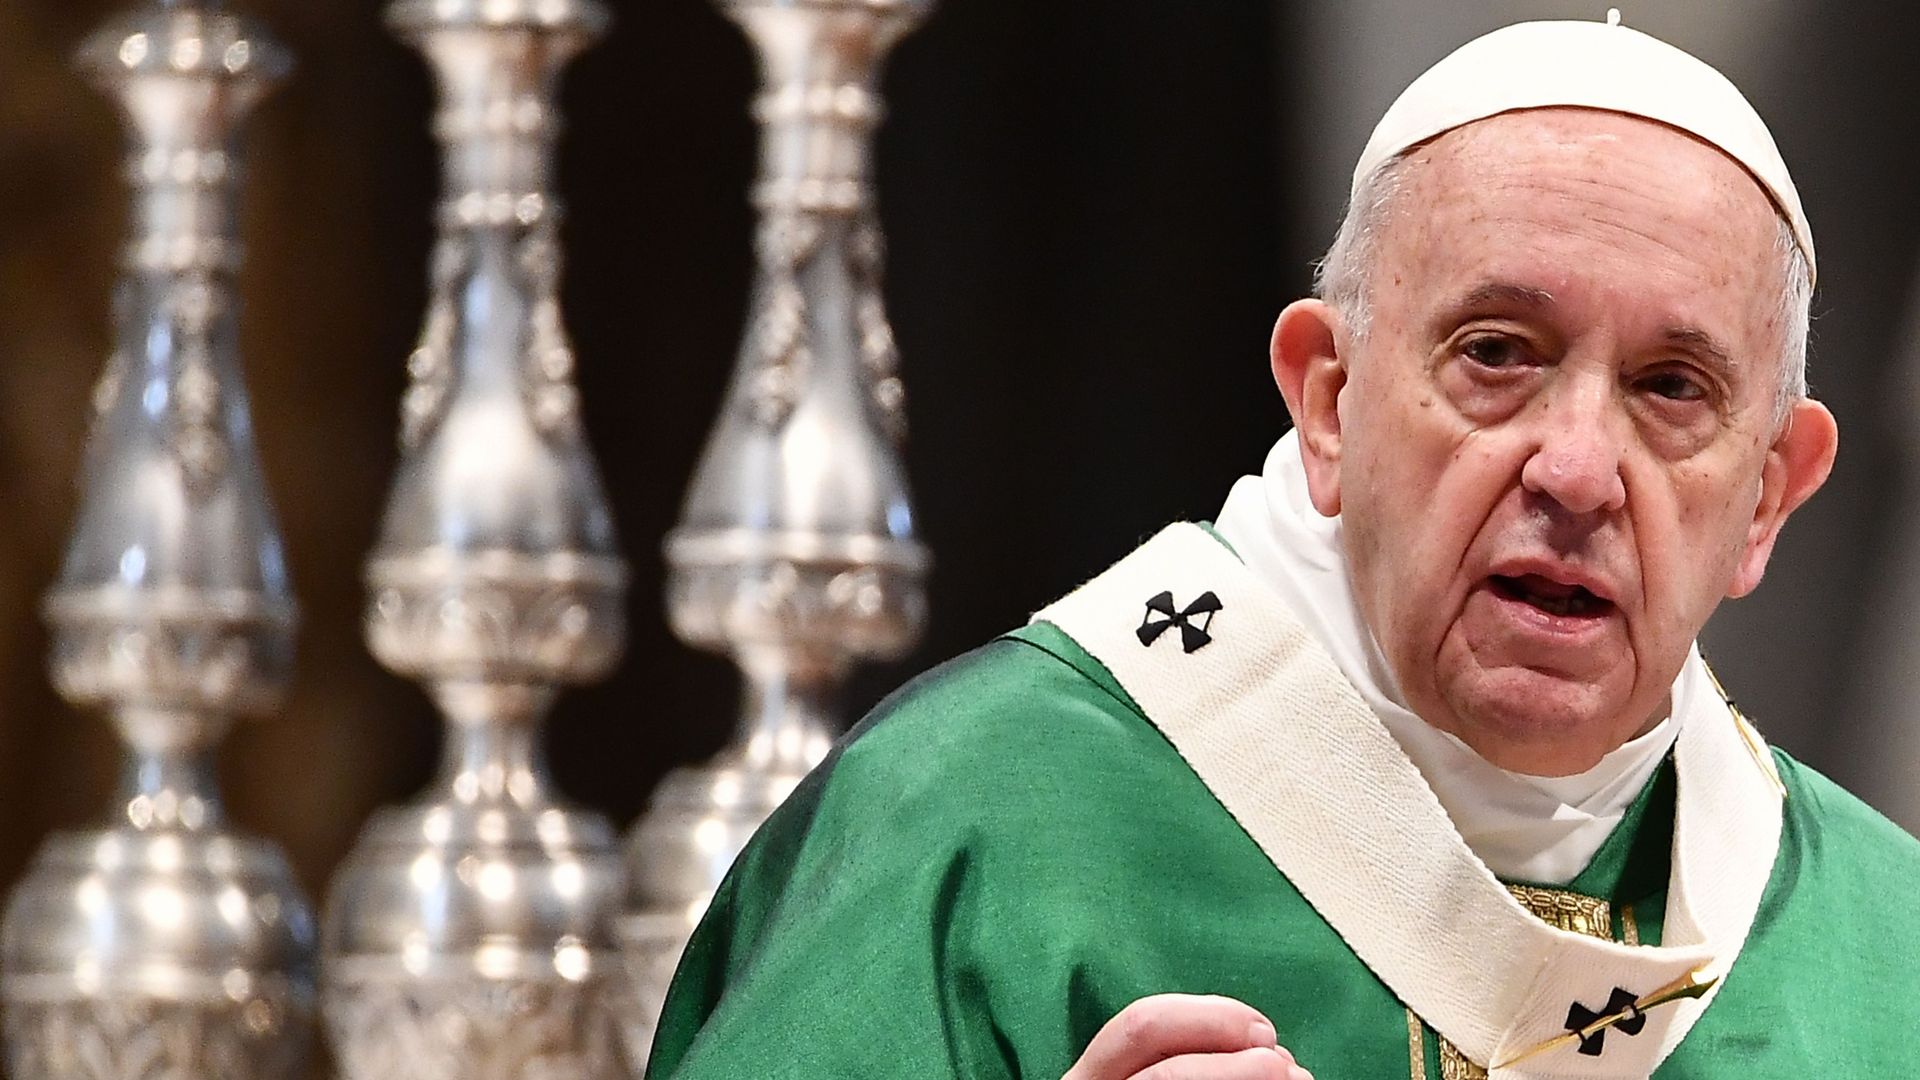 Pope Francis on Jan. 26